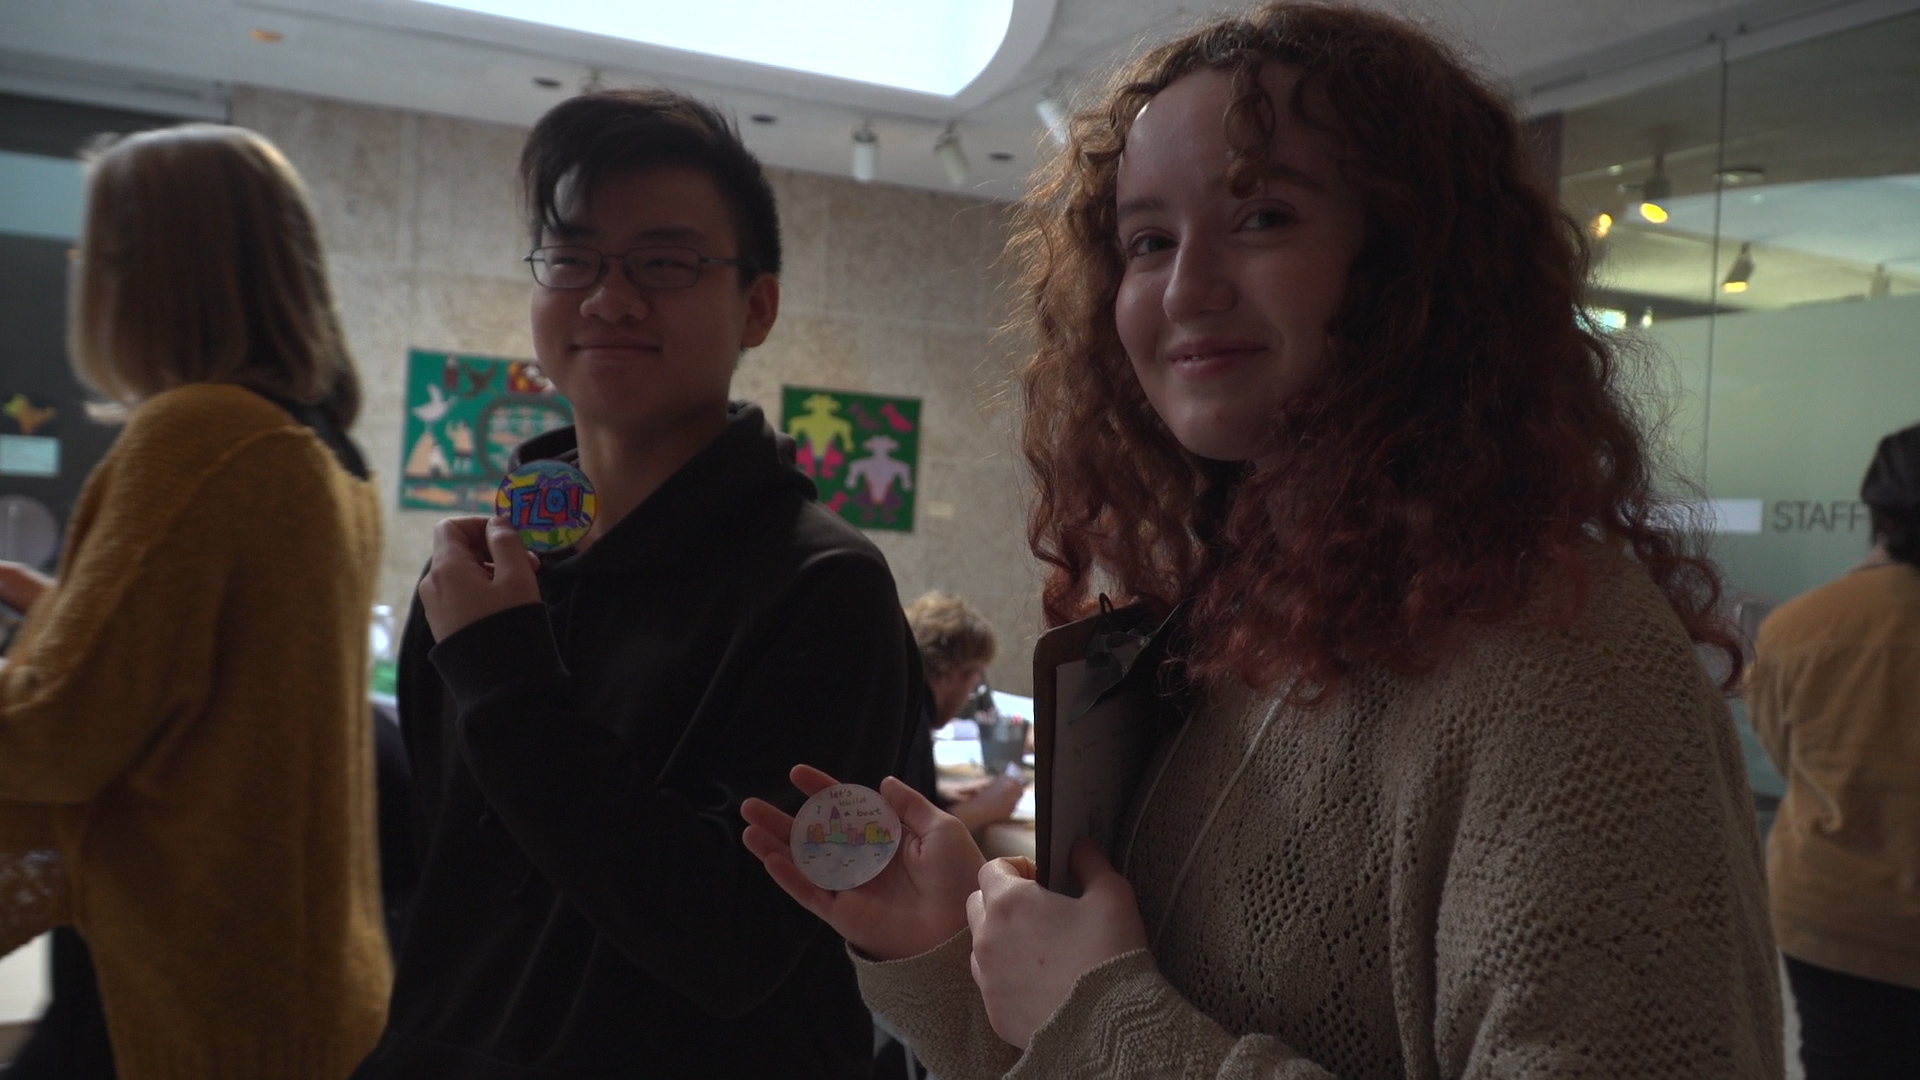 William Zhang and Sophia Wilcott show off the poetry buttons they made.